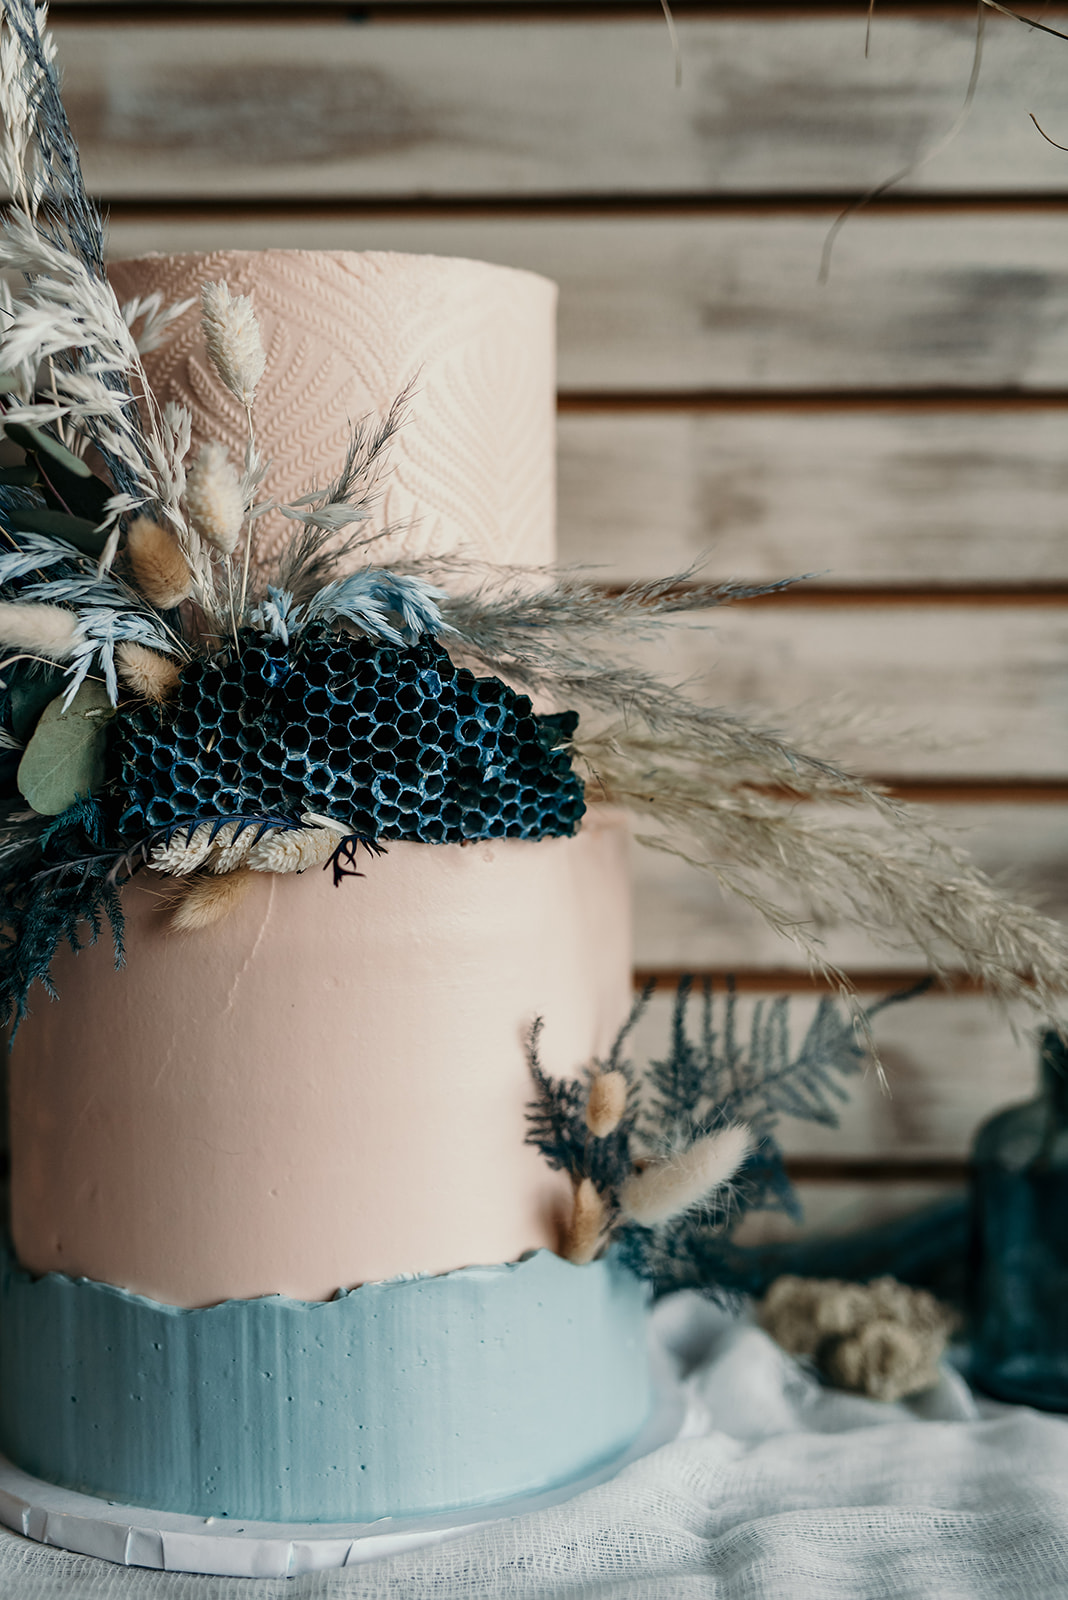 Bohemian wedding cake with deep blue and teal accents and a honeycomb spray painted blue